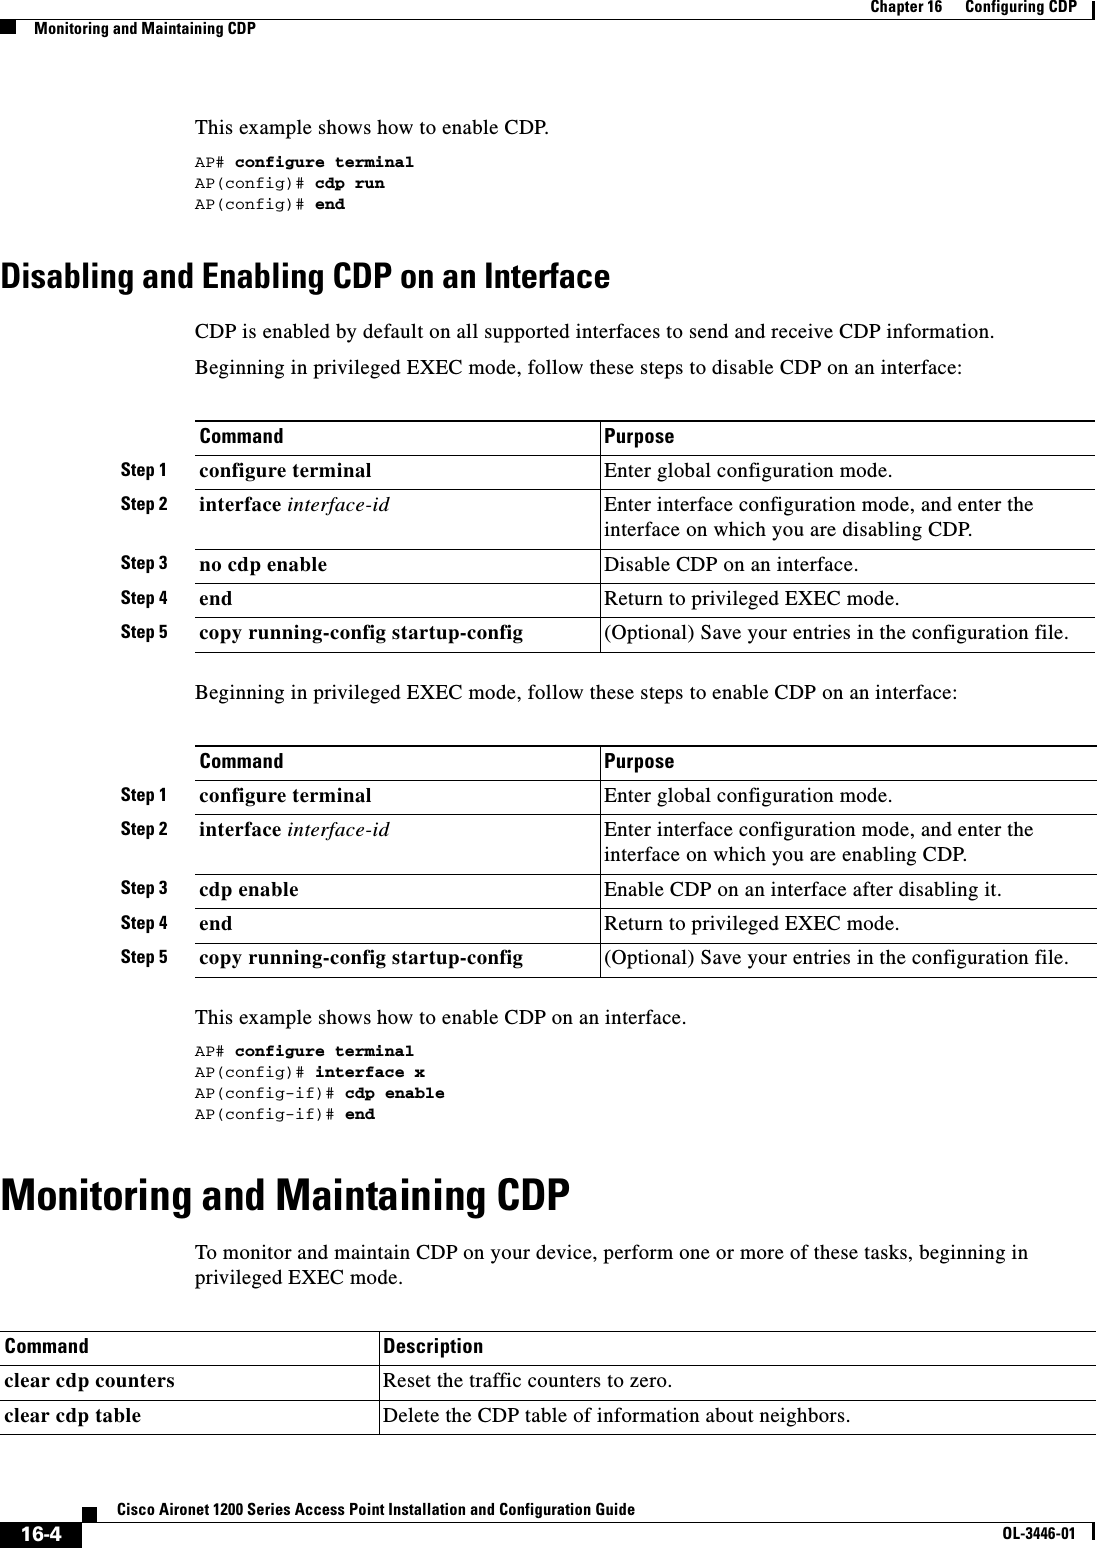 16-4Cisco Aironet 1200 Series Access Point Installation and Configuration GuideOL-3446-01Chapter 16      Configuring CDPMonitoring and Maintaining CDPThis example shows how to enable CDP.AP# configure terminalAP(config)# cdp runAP(config)# endDisabling and Enabling CDP on an InterfaceCDP is enabled by default on all supported interfaces to send and receive CDP information.Beginning in privileged EXEC mode, follow these steps to disable CDP on an interface:Beginning in privileged EXEC mode, follow these steps to enable CDP on an interface:This example shows how to enable CDP on an interface.AP# configure terminalAP(config)# interface xAP(config-if)# cdp enableAP(config-if)# endMonitoring and Maintaining CDPTo monitor and maintain CDP on your device, perform one or more of these tasks, beginning in privileged EXEC mode.Command PurposeStep 1 configure terminal Enter global configuration mode.Step 2 interface interface-id Enter interface configuration mode, and enter the interface on which you are disabling CDP.Step 3 no cdp enable  Disable CDP on an interface.Step 4 end Return to privileged EXEC mode.Step 5 copy running-config startup-config (Optional) Save your entries in the configuration file.Command PurposeStep 1 configure terminal Enter global configuration mode.Step 2 interface interface-id Enter interface configuration mode, and enter the interface on which you are enabling CDP.Step 3 cdp enable  Enable CDP on an interface after disabling it.Step 4 end Return to privileged EXEC mode.Step 5 copy running-config startup-config (Optional) Save your entries in the configuration file.Command Descriptionclear cdp counters Reset the traffic counters to zero.clear cdp table Delete the CDP table of information about neighbors.